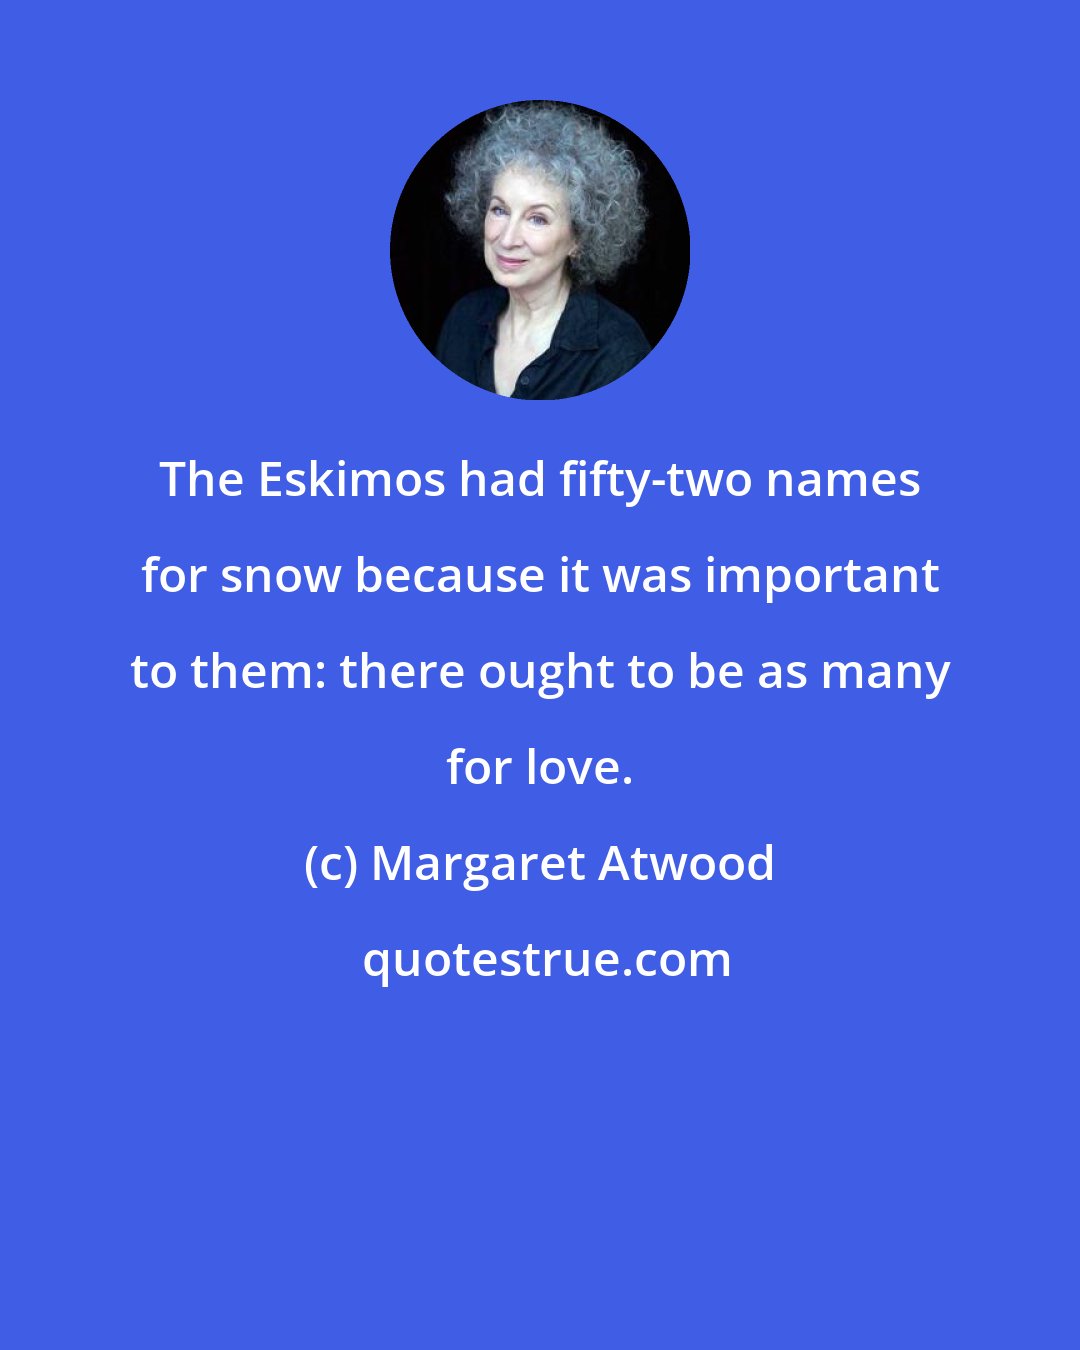 Margaret Atwood: The Eskimos had fifty-two names for snow because it was important to them: there ought to be as many for love.